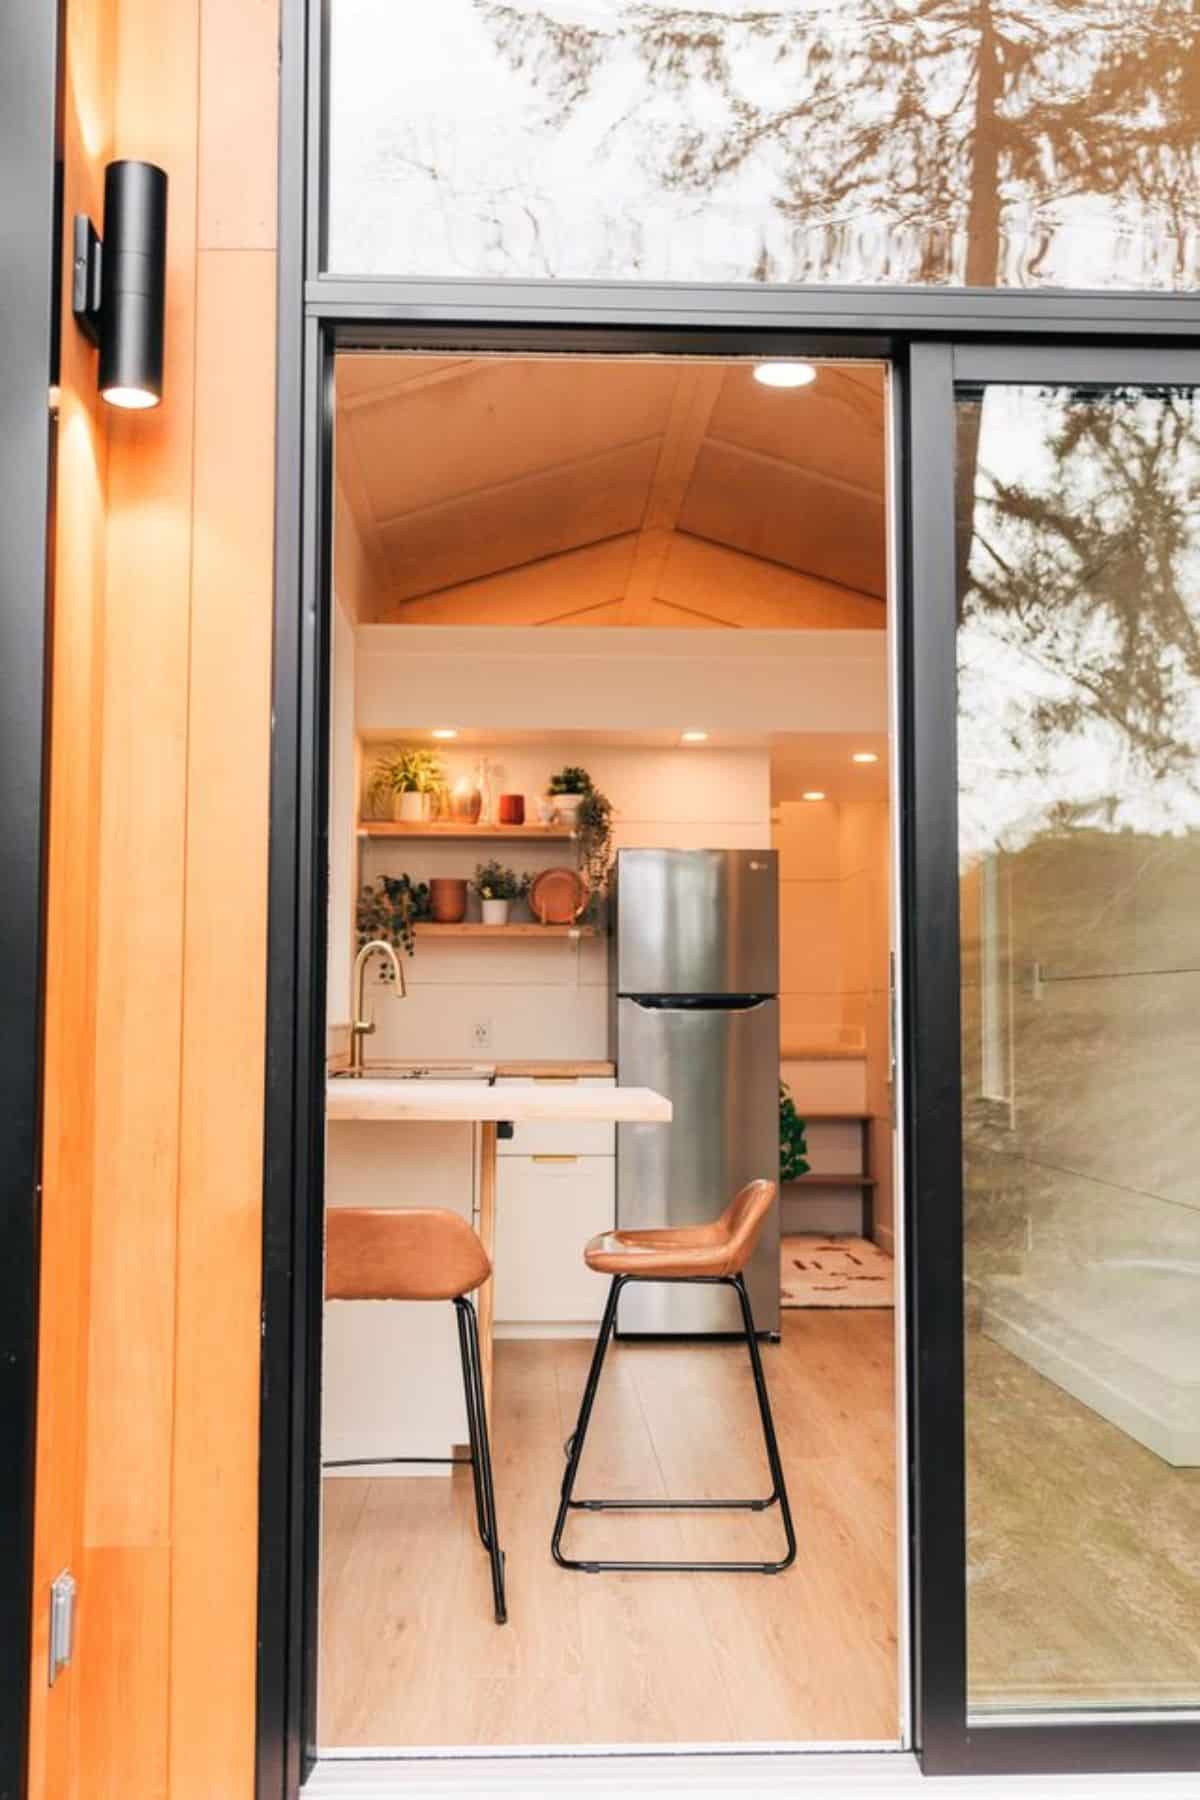 main door of beautifully crafted tiny home